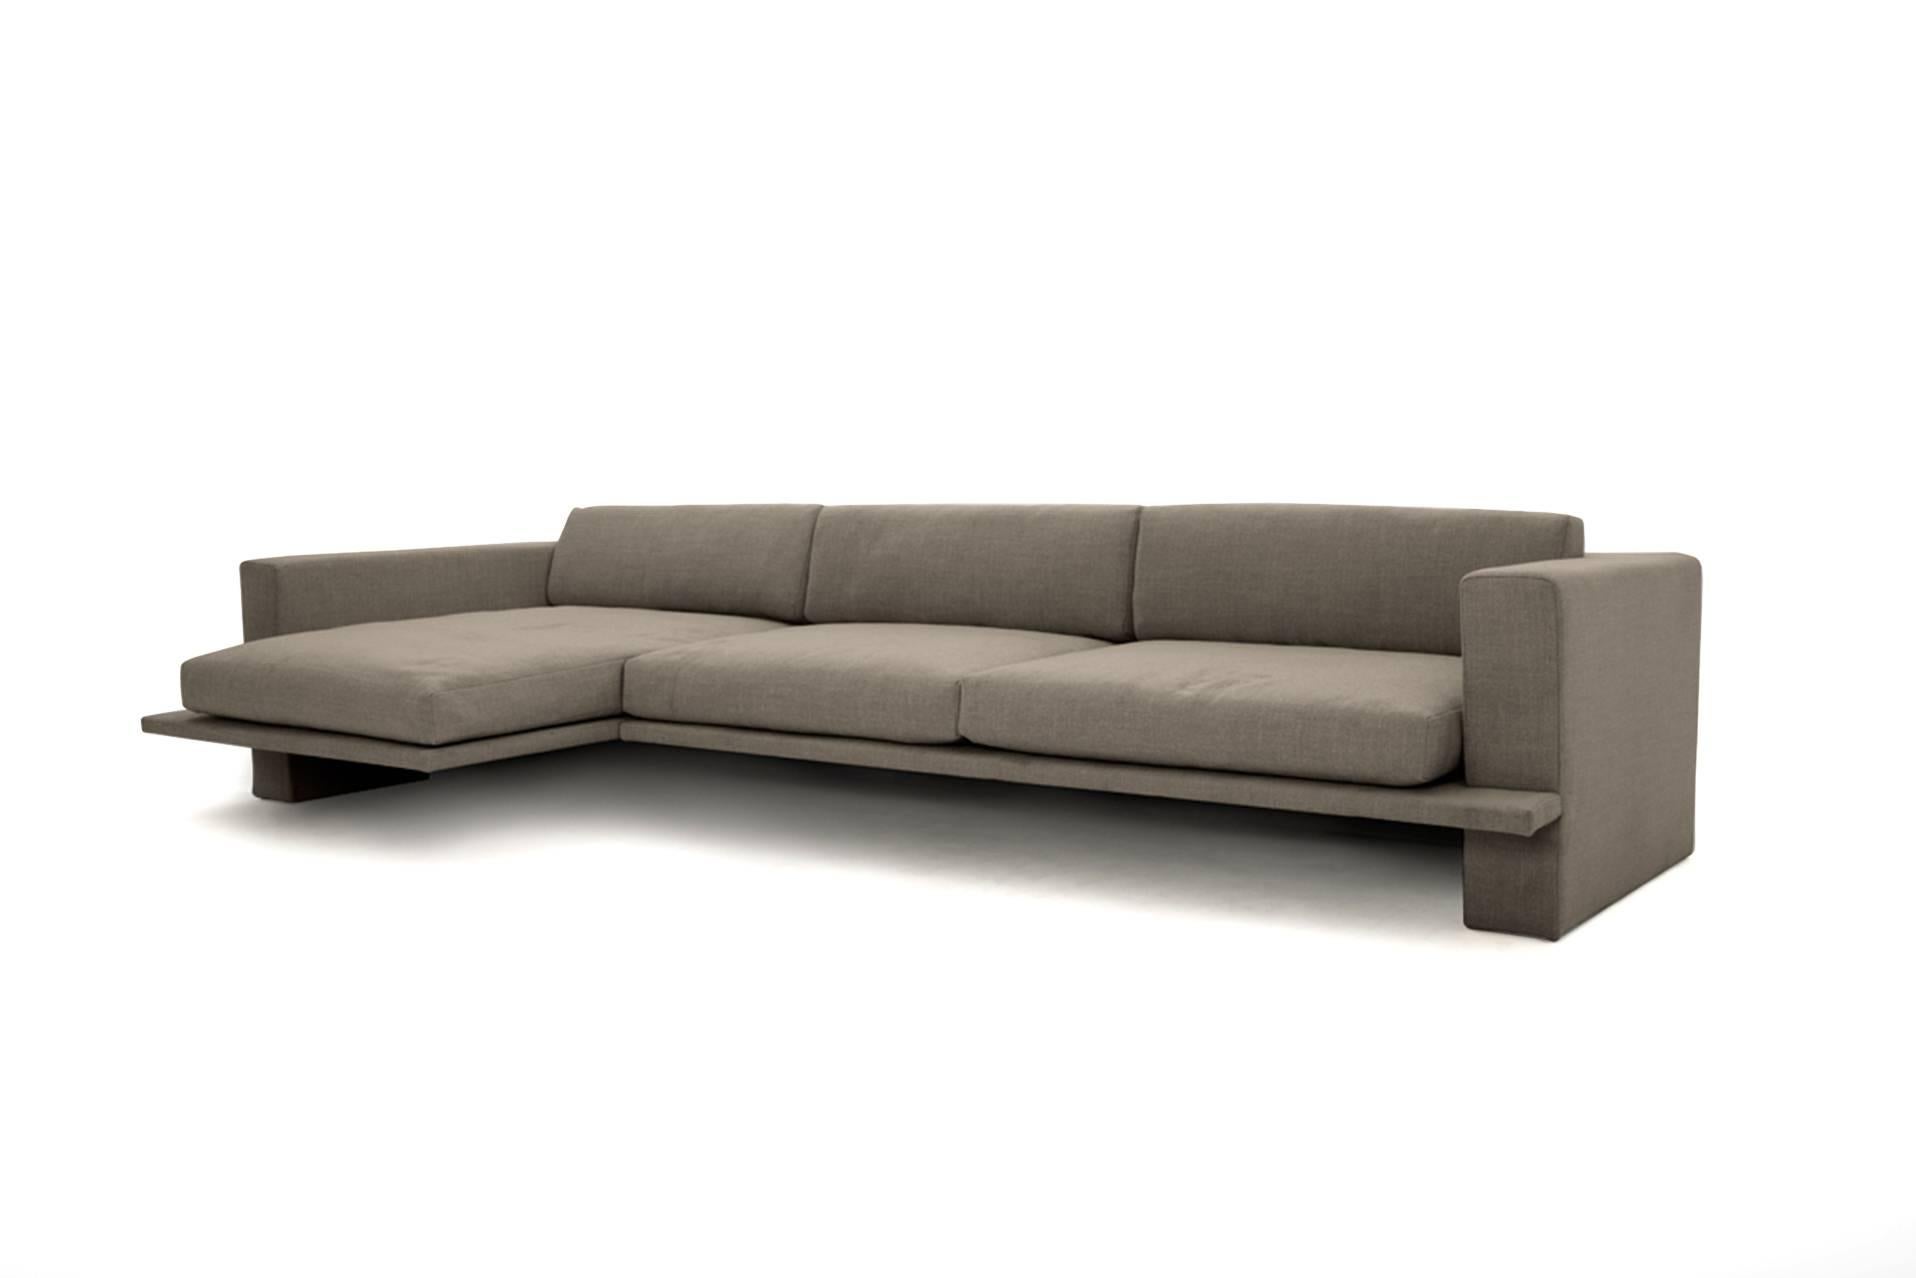 Woven Palisades Sectional Sofa LAXseries by MASHstudios For Sale